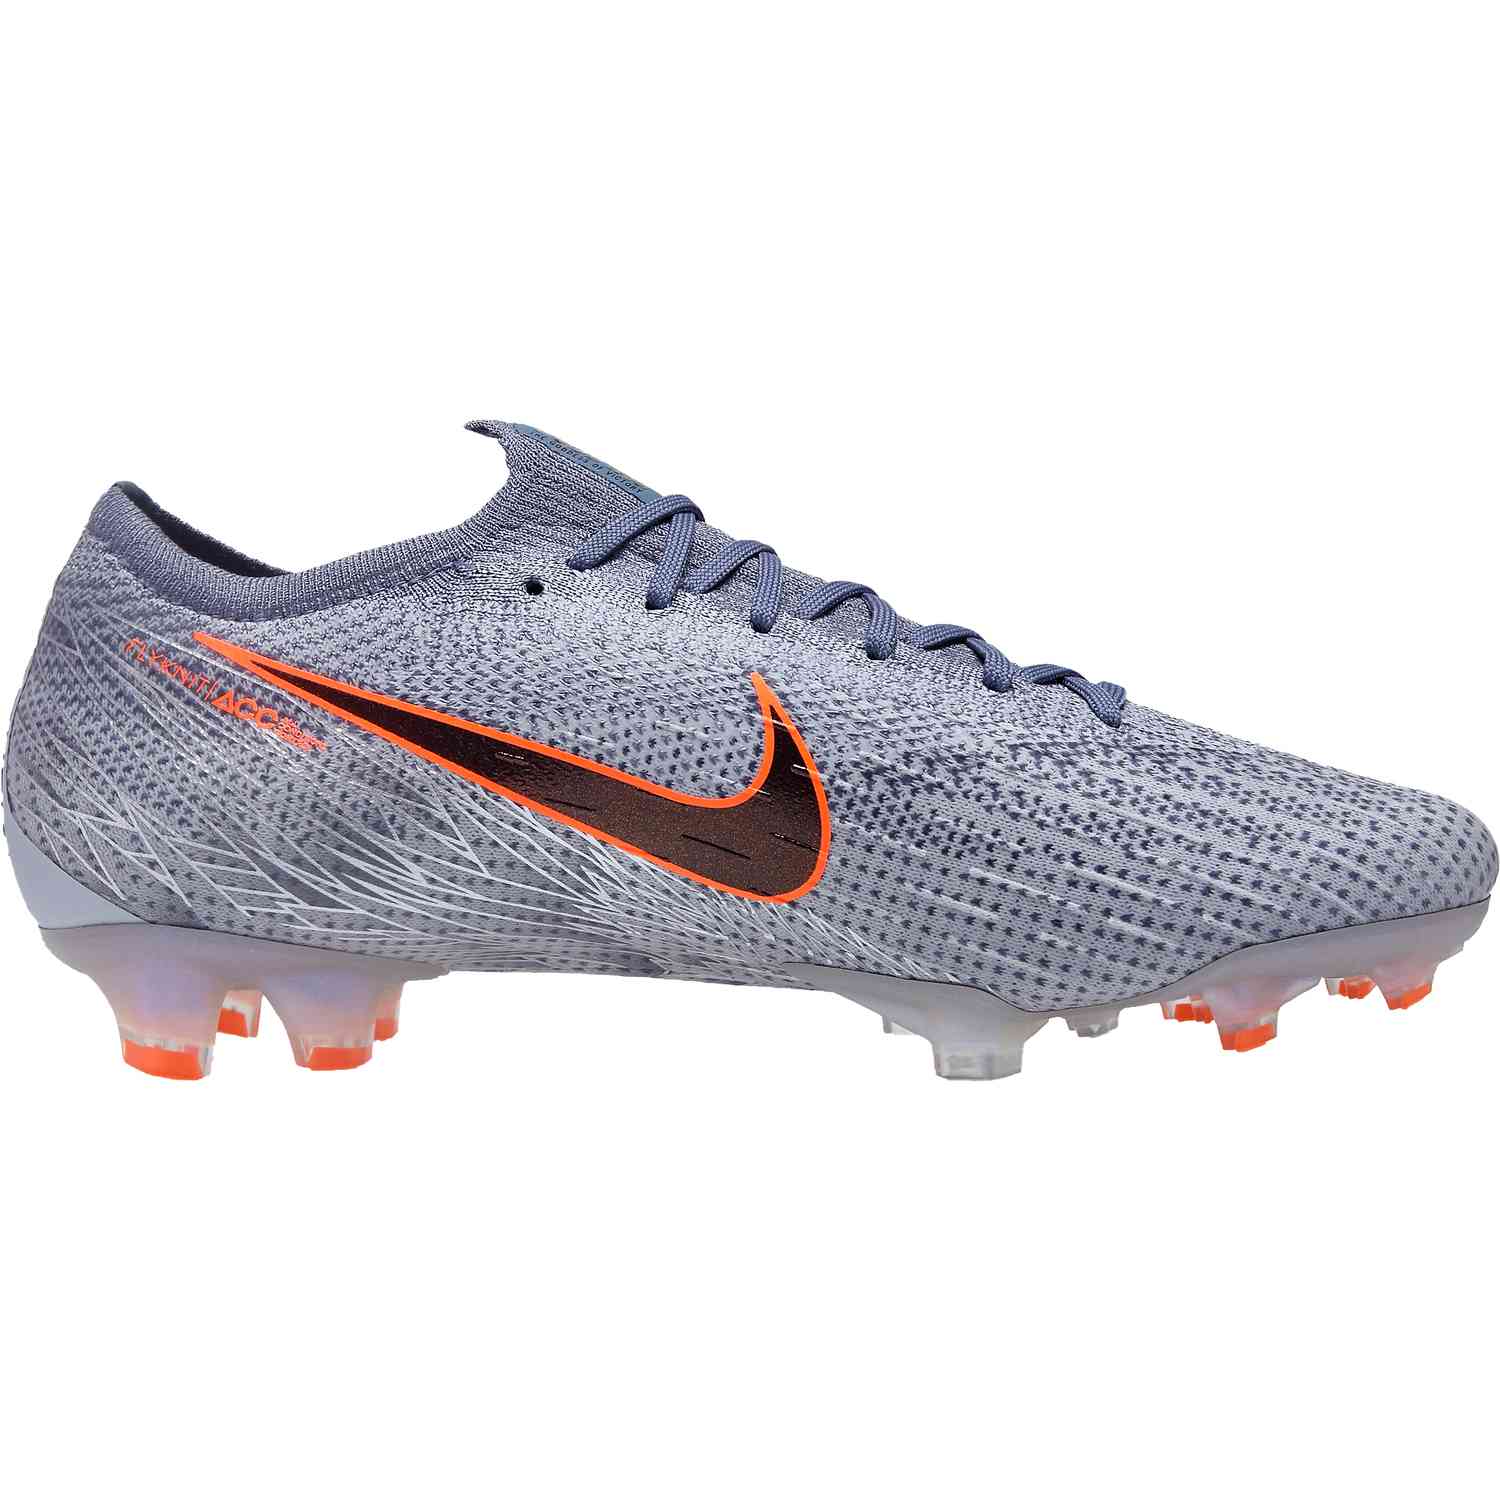 Nike MagistaX Proximo II DF TF (Men's) Best Price Compare